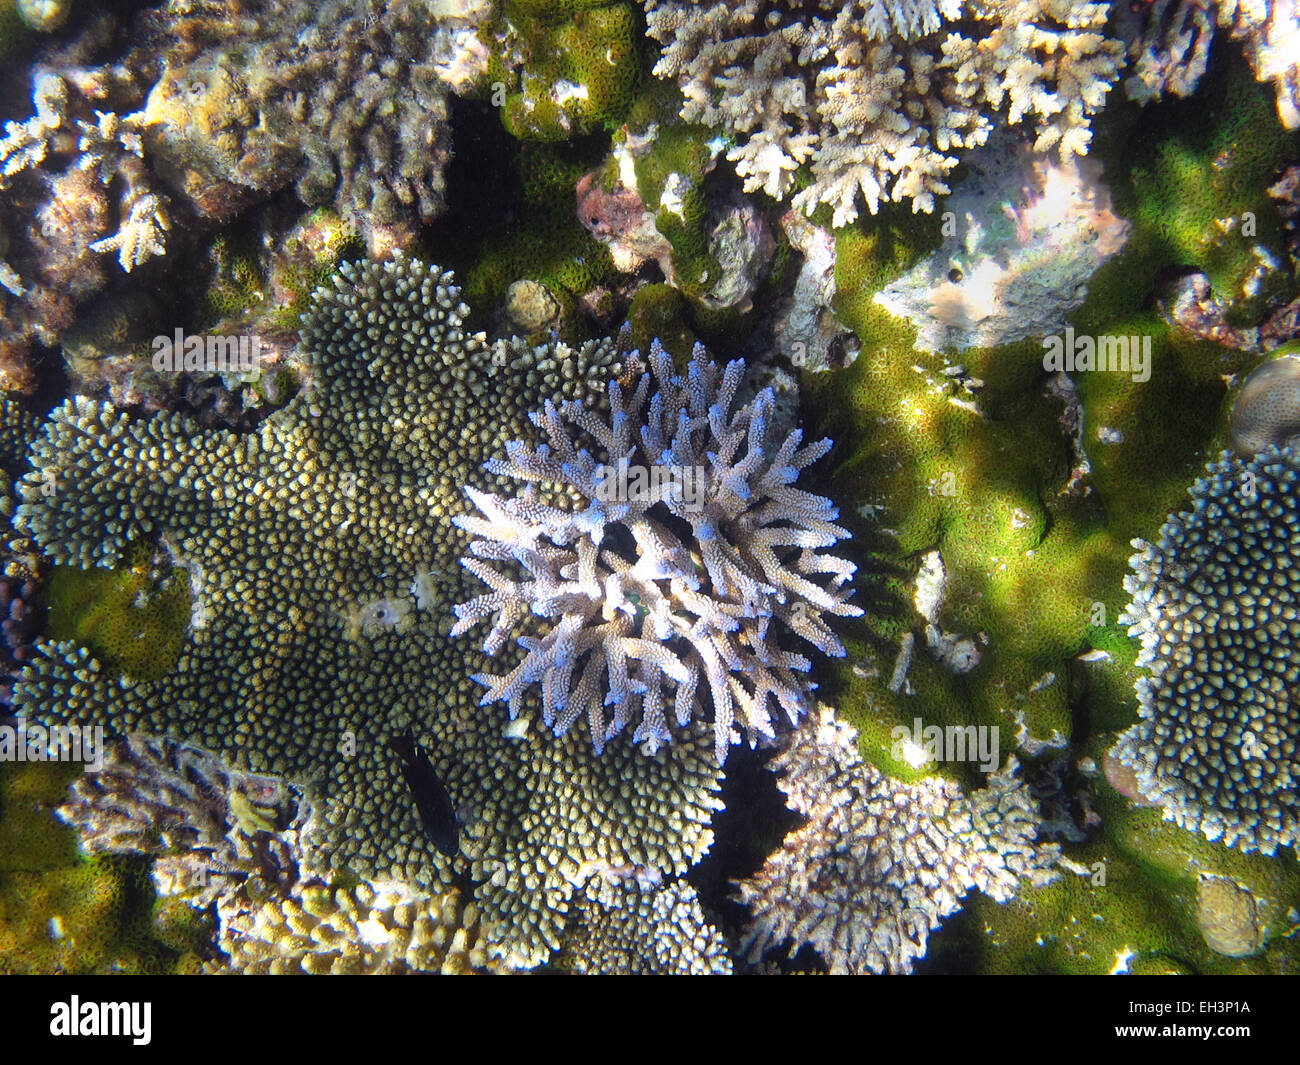 Staghorn and other corals on a reef in the Maldives Stock Photo